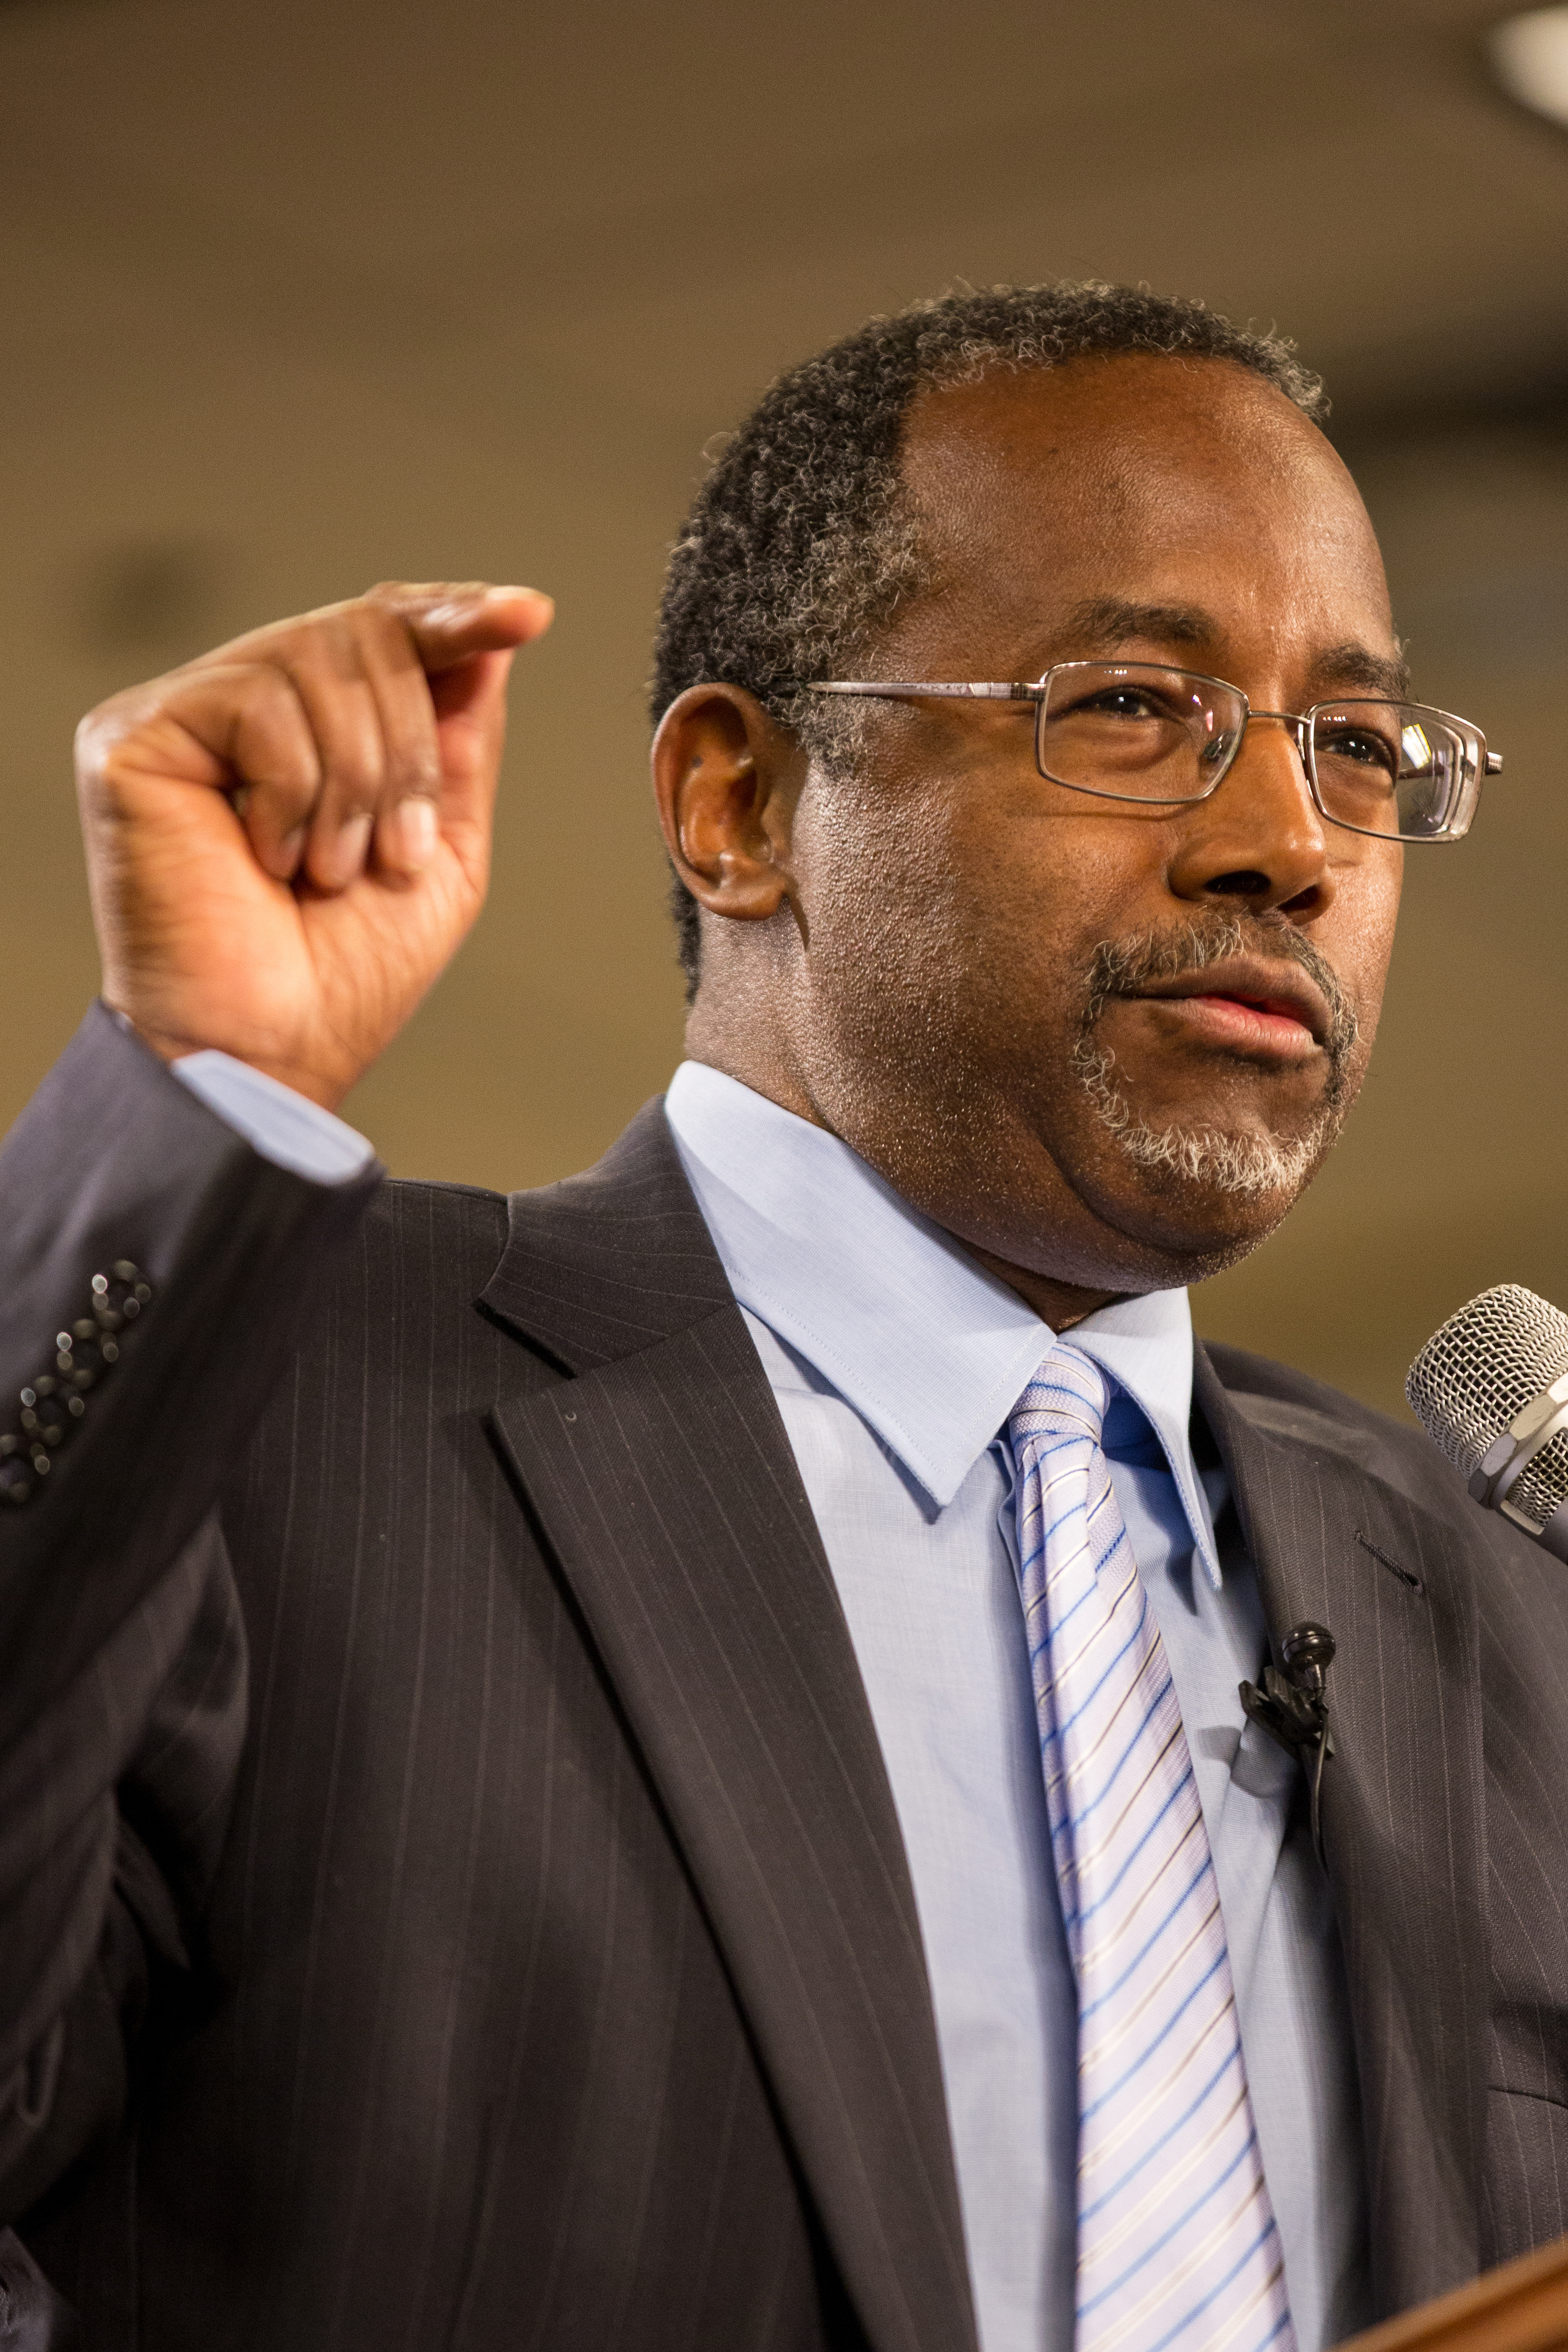 Pointing the wrong way: Carson is just plain wrong on the science (Richard Ellis; Getty Images)